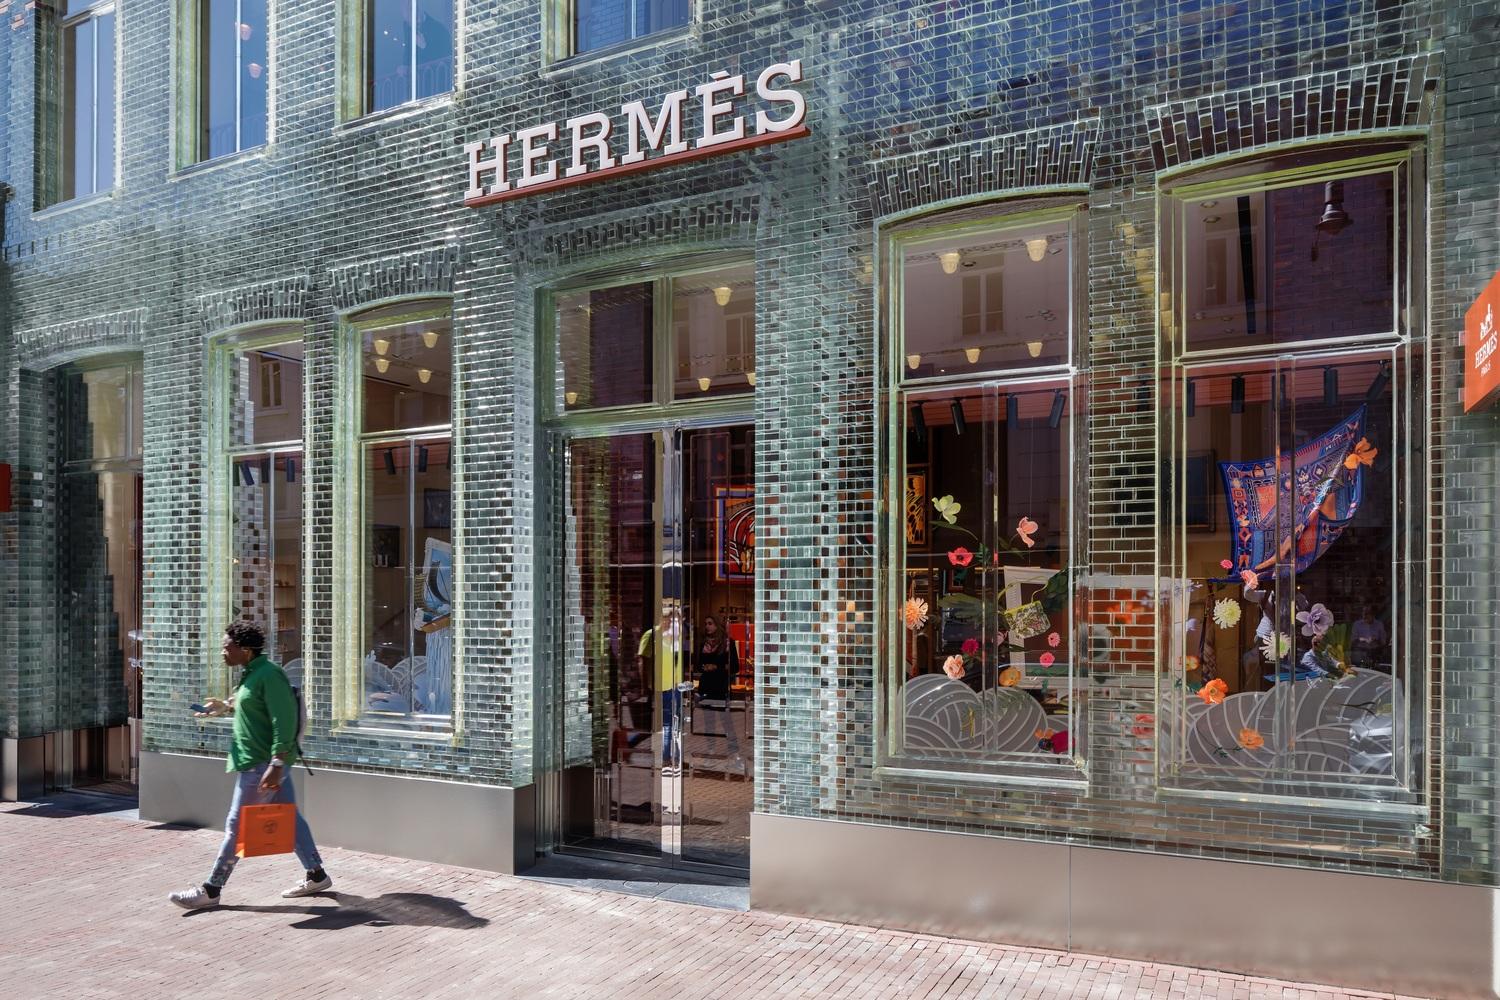 Ethereal Glass Facade Meets Historic Influences in Hermès’s New Amsterdam Store